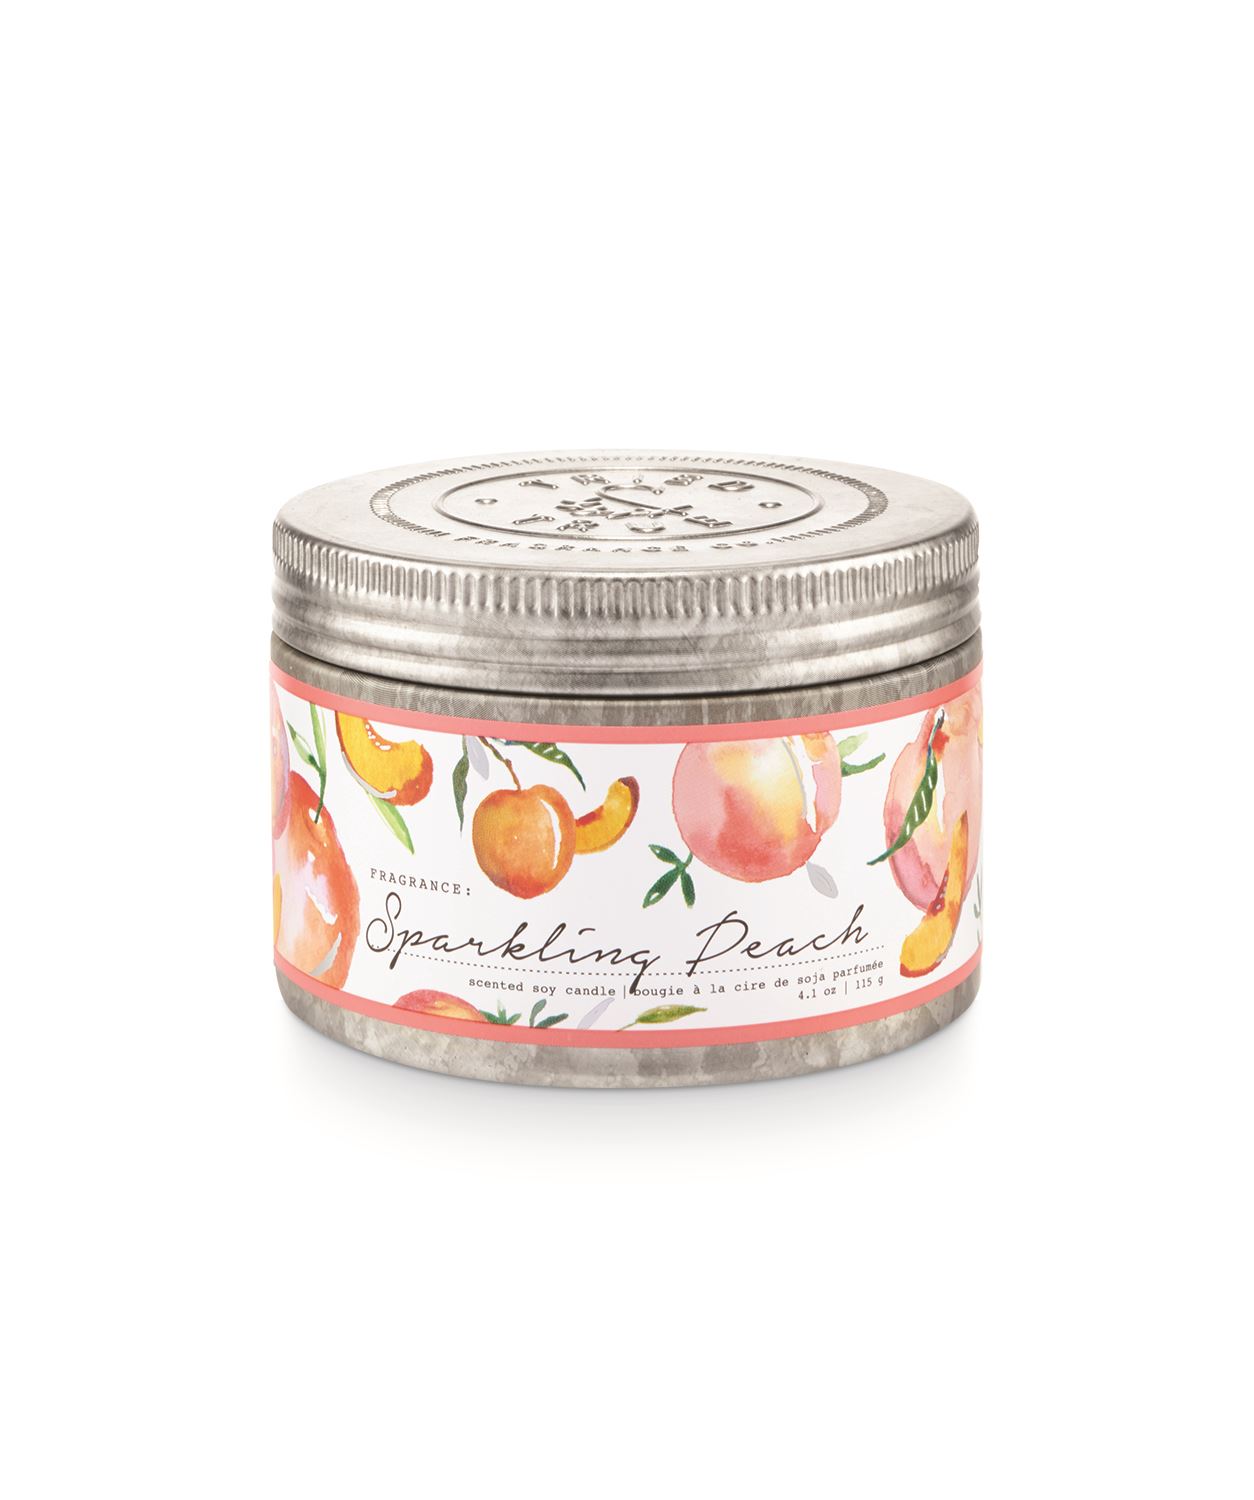 Tried & True Small Tin Candle: Sparkling Peach